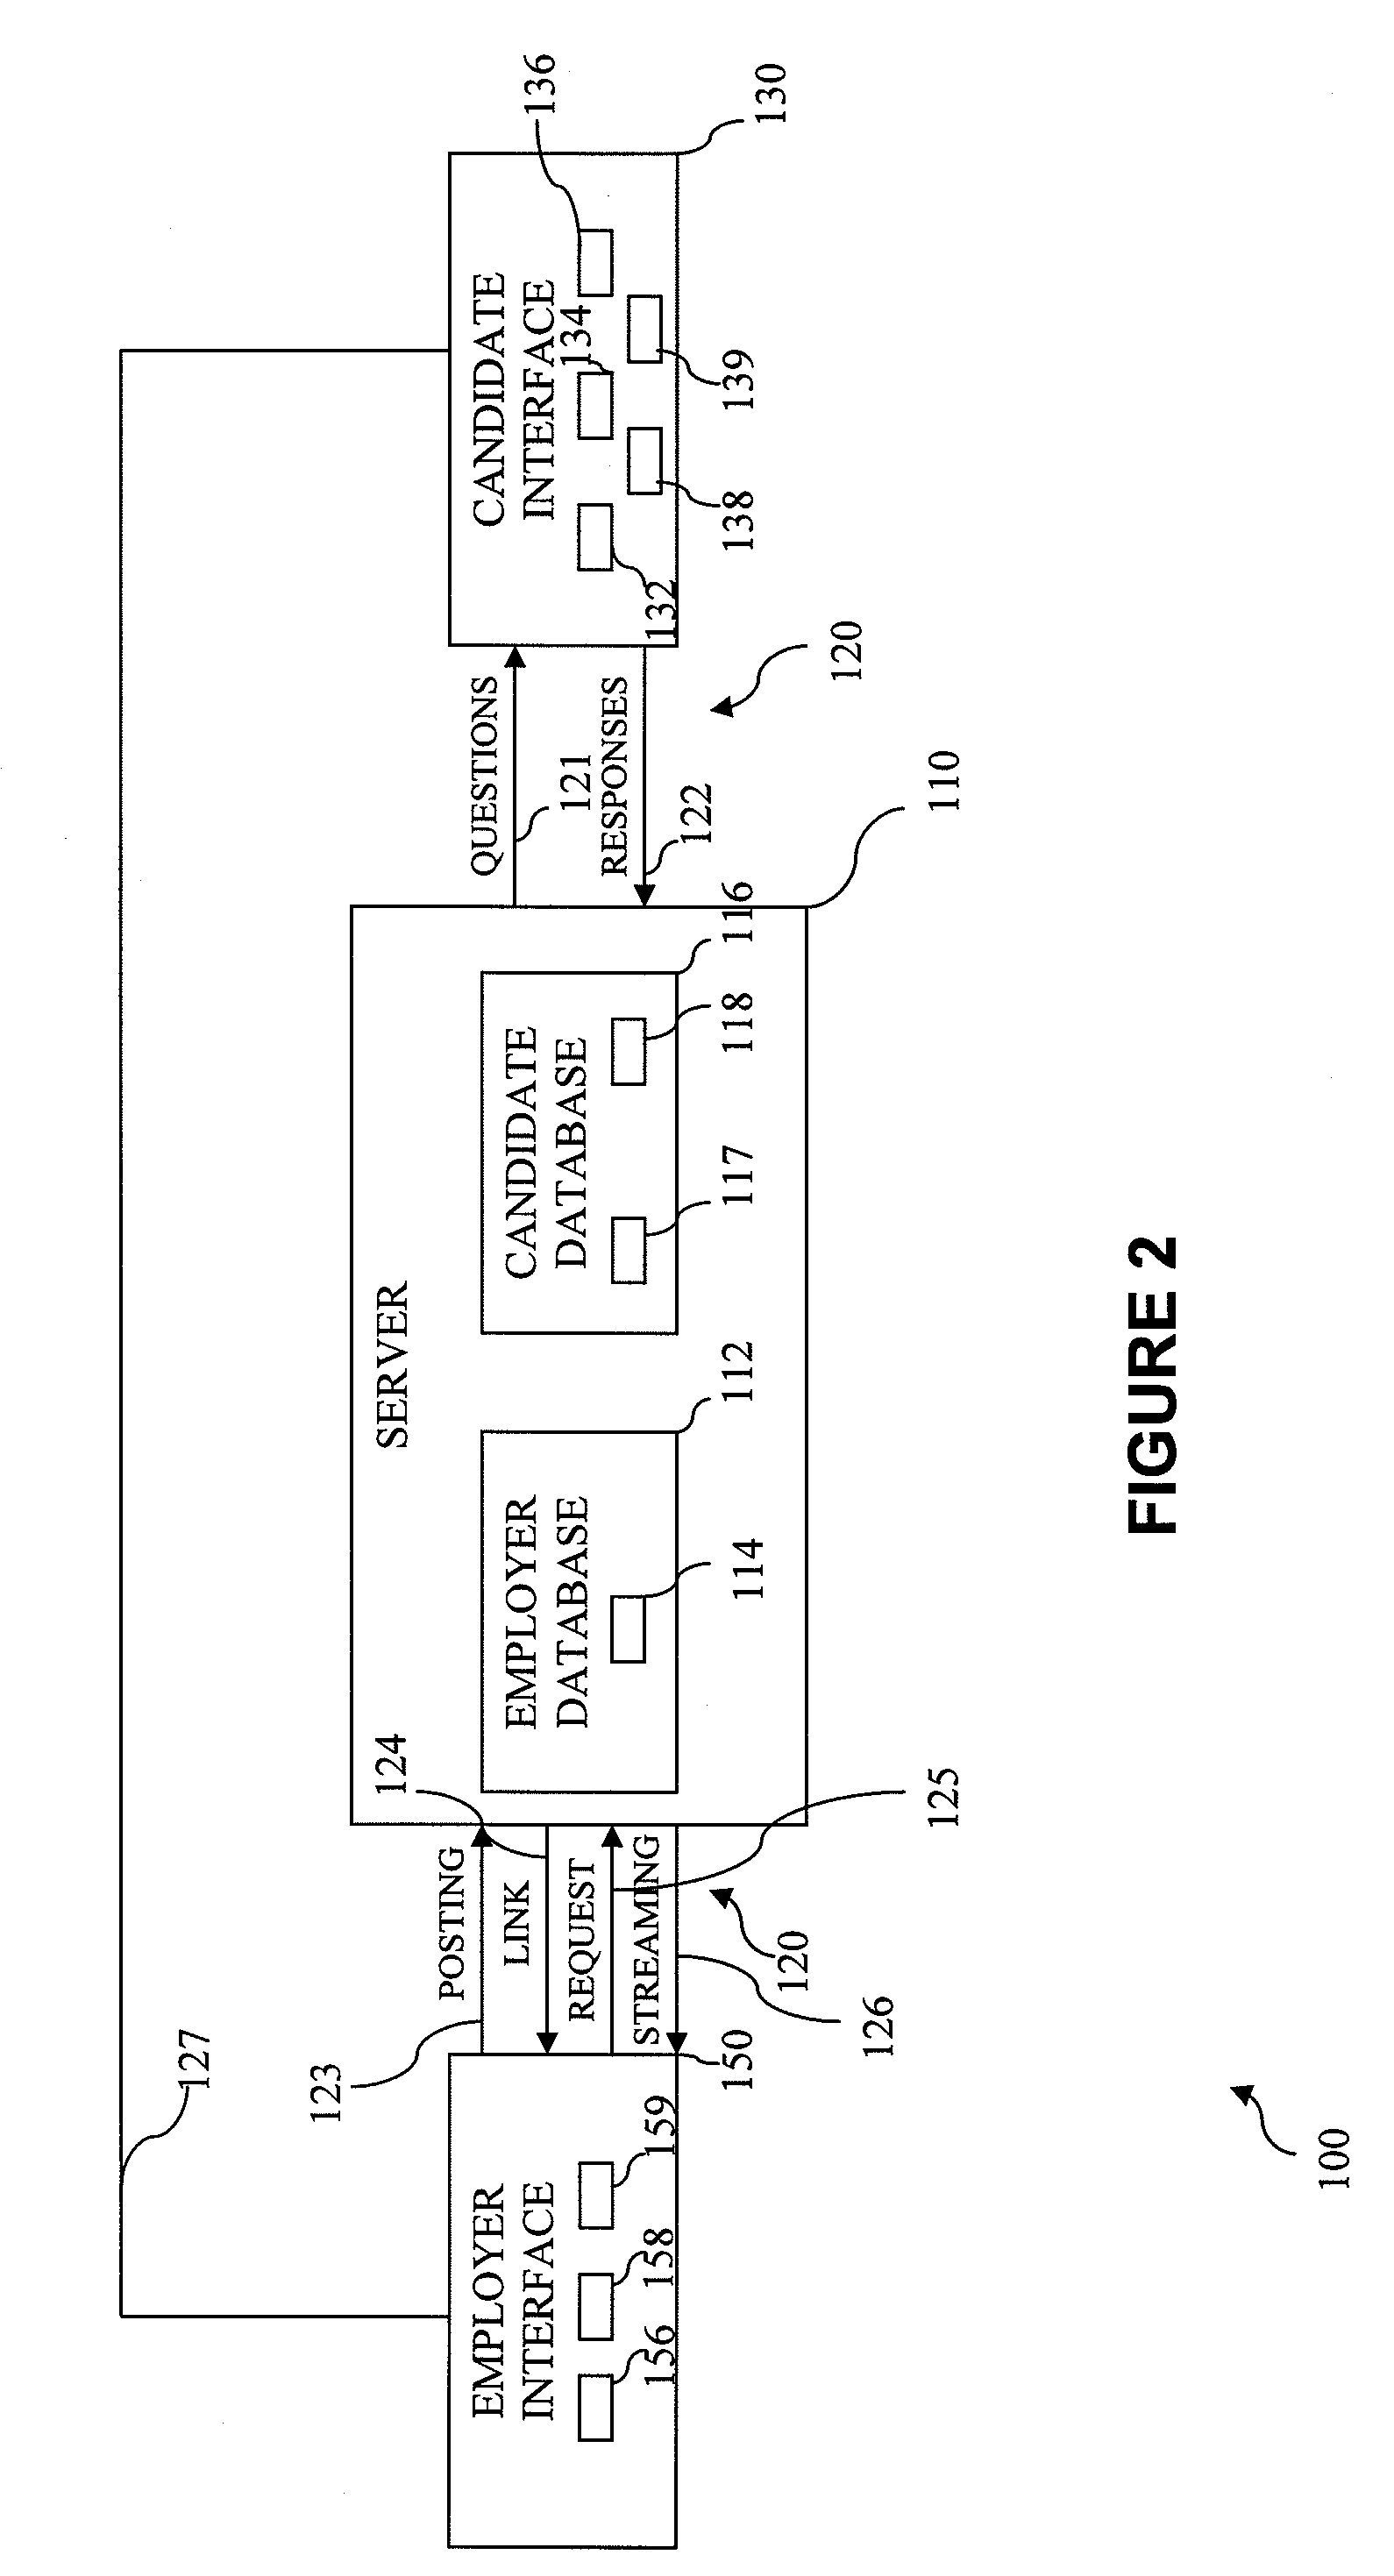 Method and system for conducting a remote employment video interview